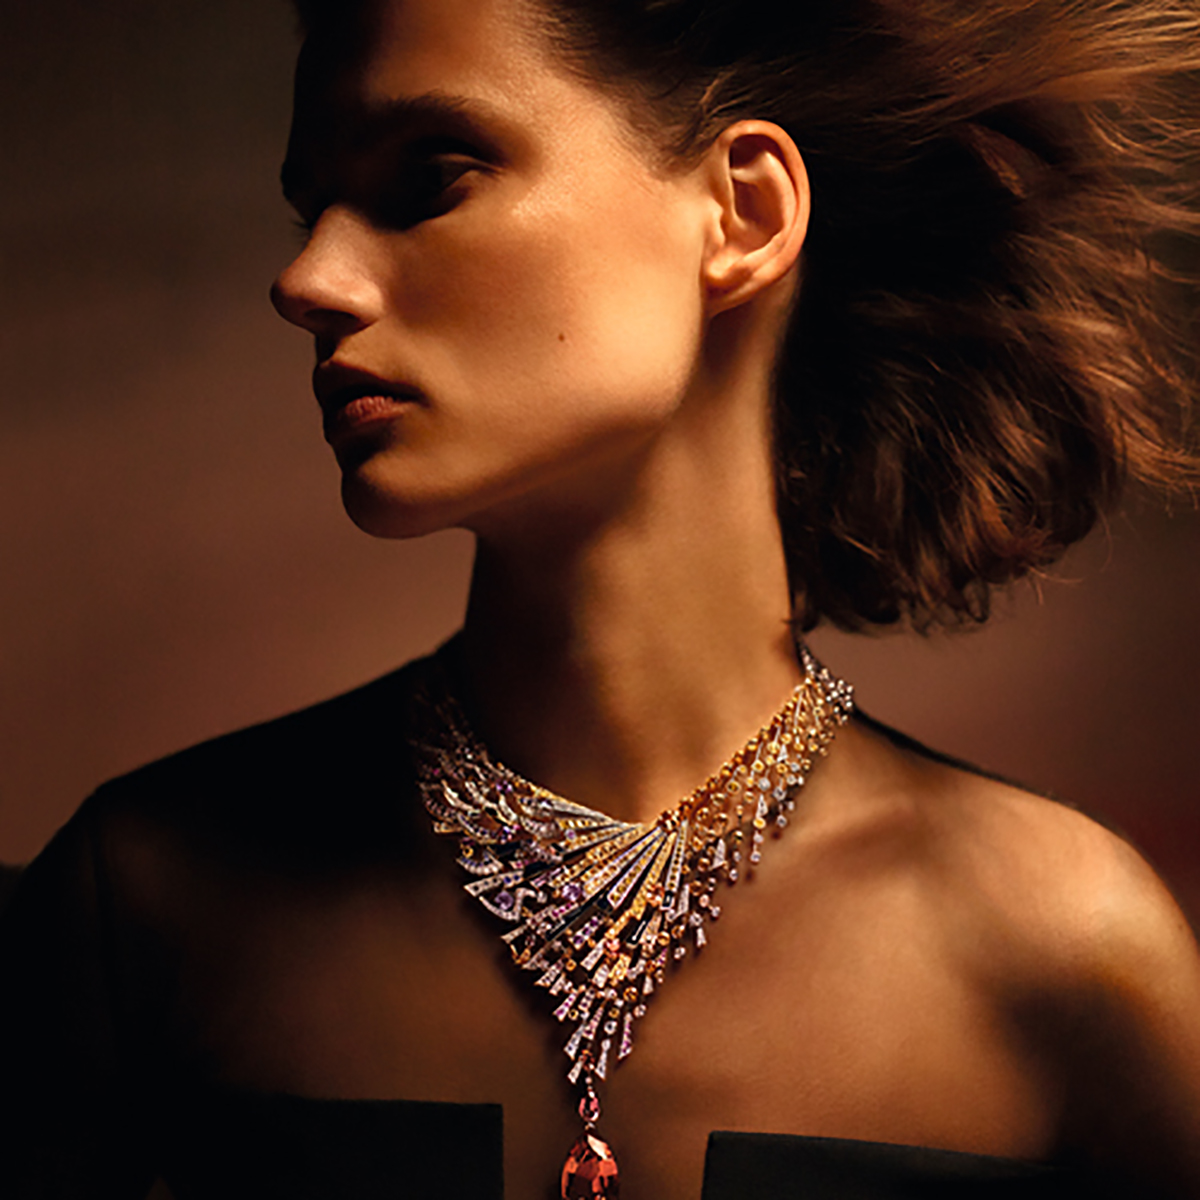 Model wearing large jewelled necklace